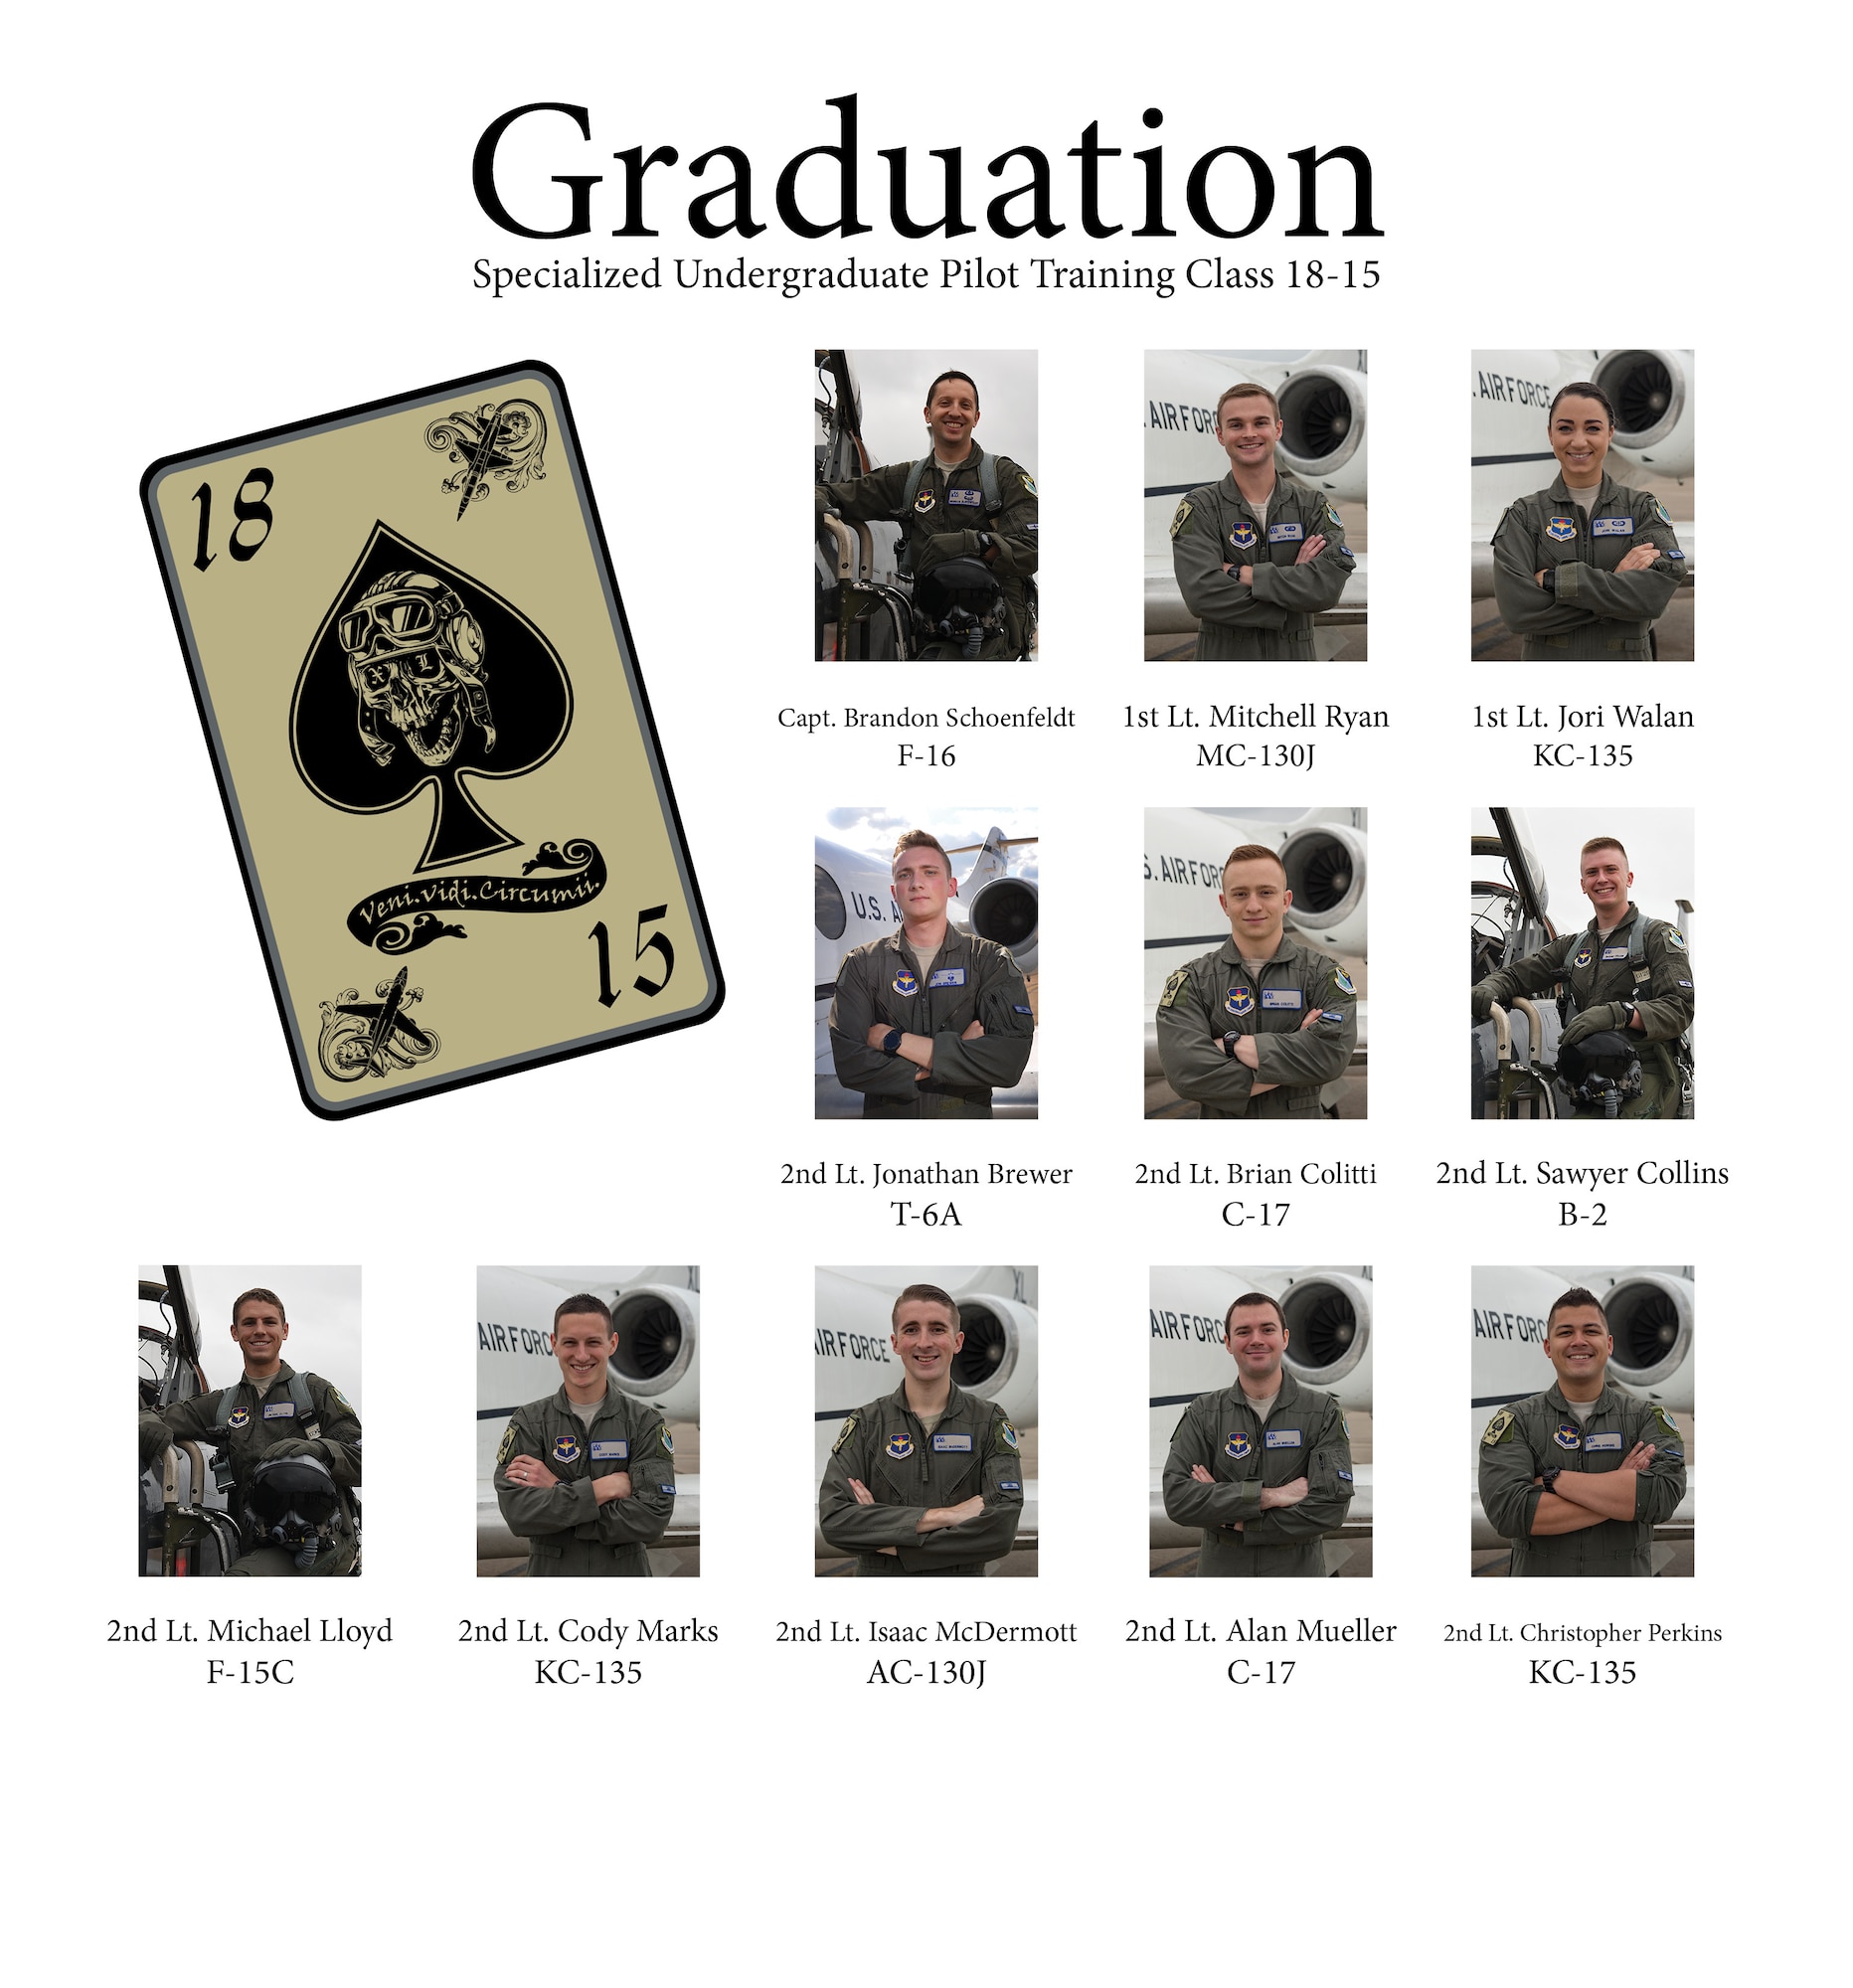 Specialized Undergraduate Pilot Training Class 18-15 graduates after 52 weeks of training at Laughlin Air Force Base, Texas, Sept. 28, 2018. Laughlin is the home of the 47th Flying Training Wing, whose mission is to graduate the world’s best military-trained pilots, deploy mission-ready warriors and develop professional and confident leaders. (U.S. Air Force graphic by Airman 1st Class Marco A. Gomez)